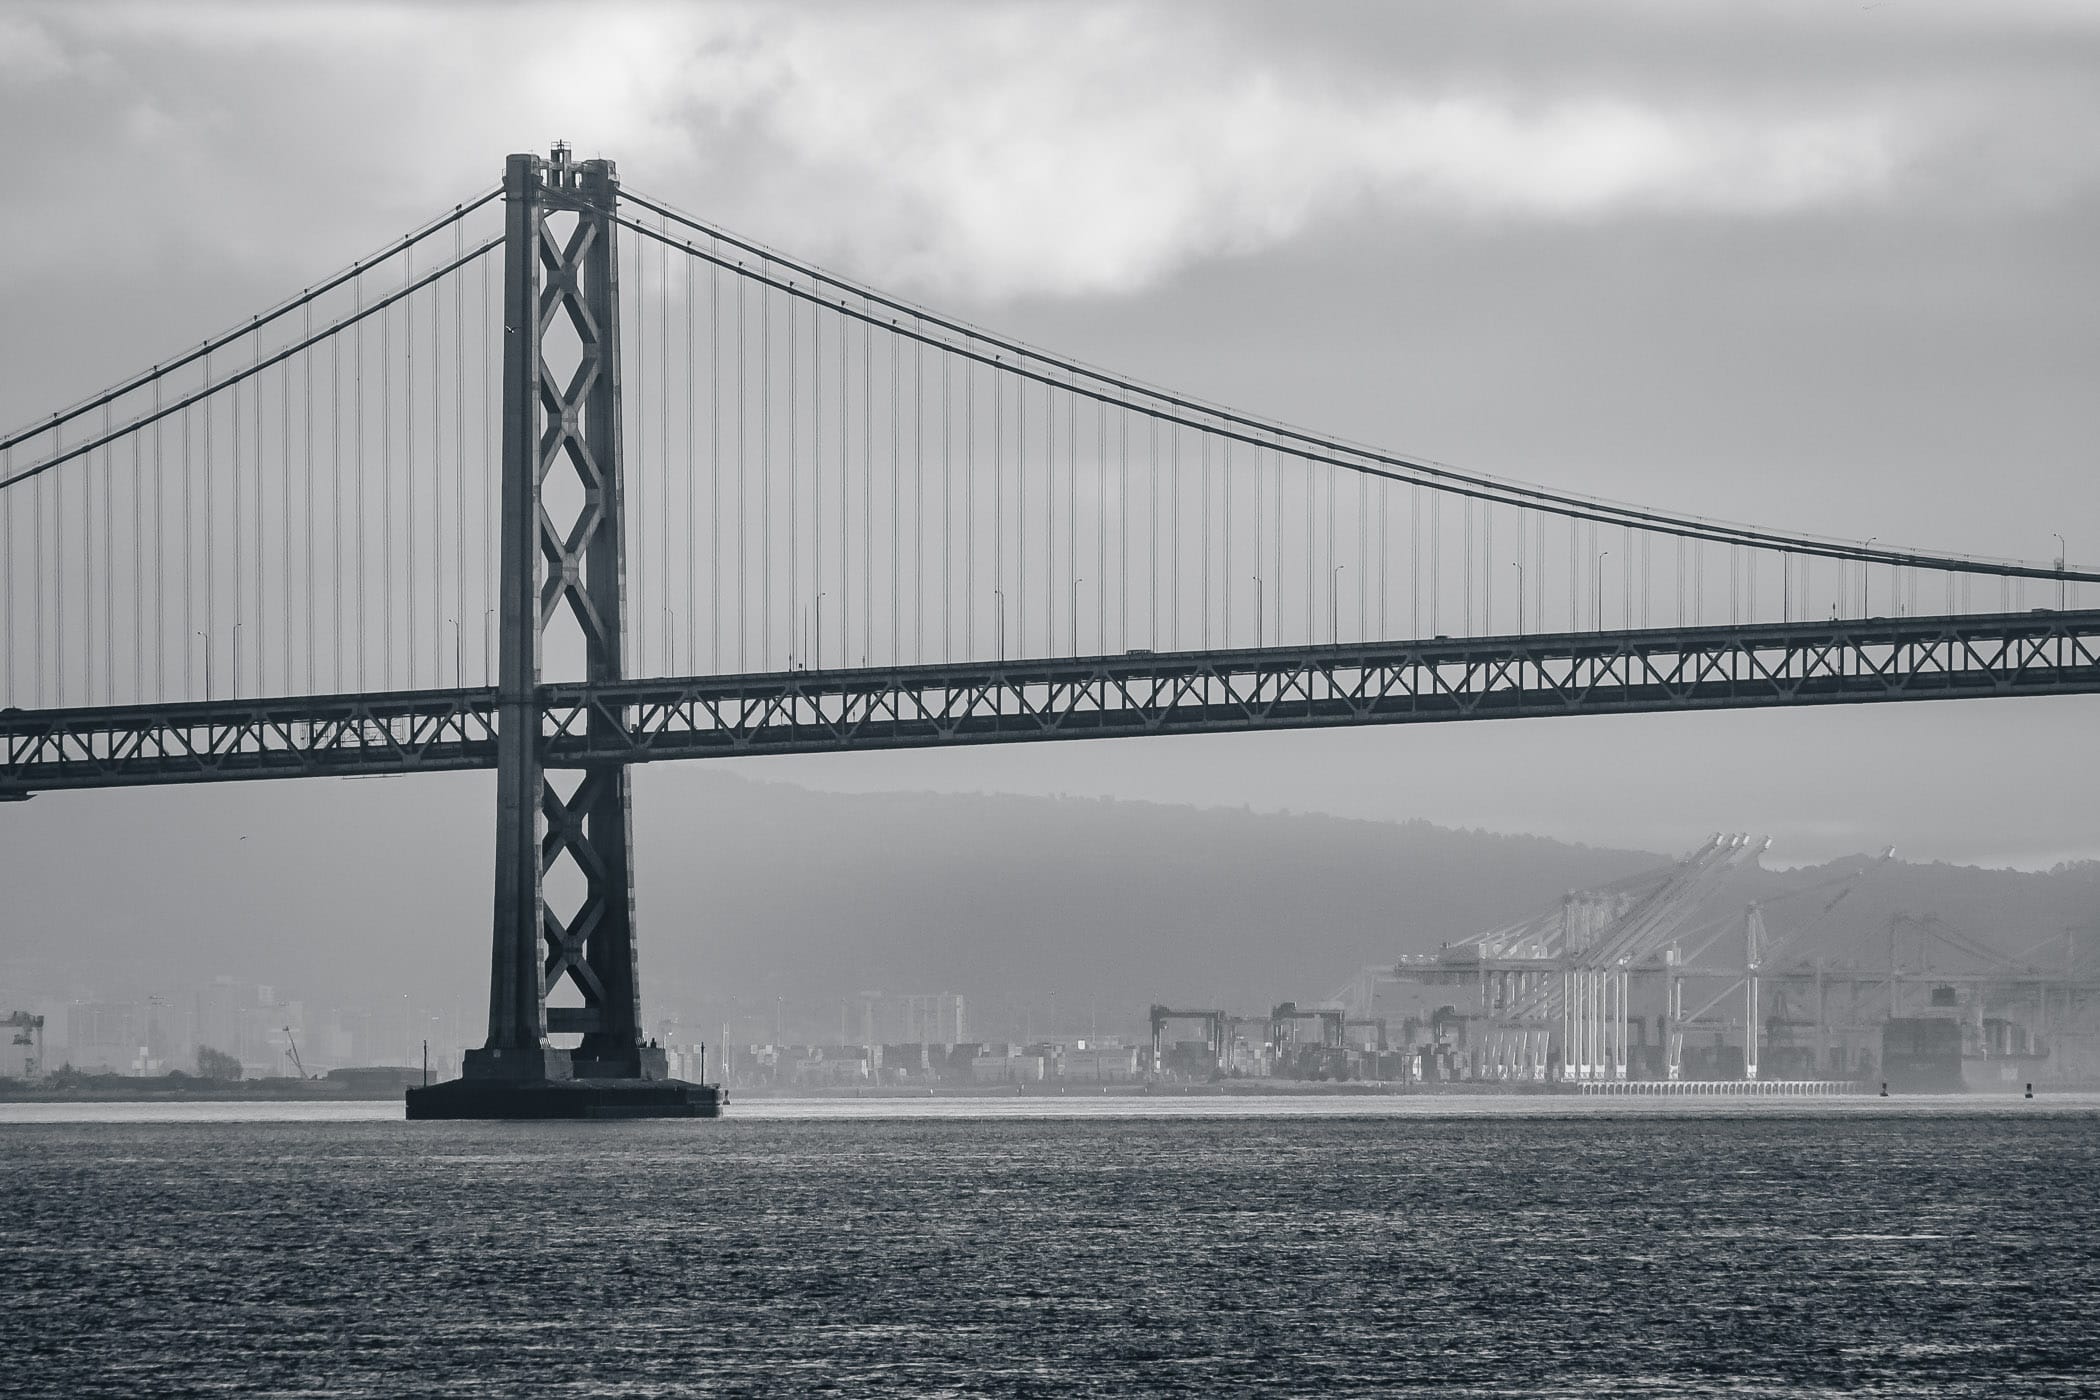 One of the towers of the San Francisco-Oakland Bay Bridge rises above San Francisco Bay.